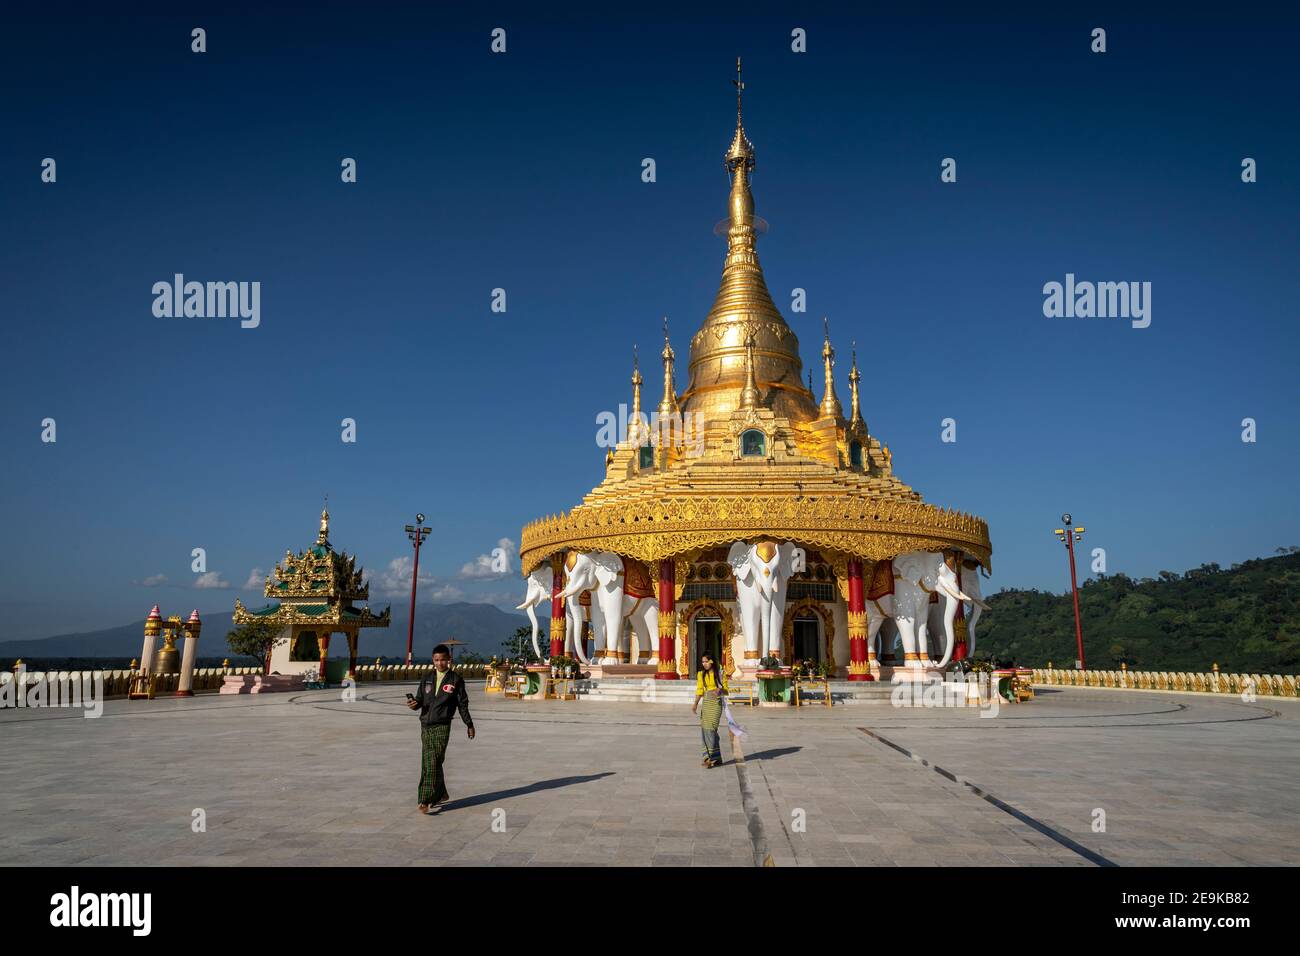 Shwe Moe Taung Pagoda near of Myikyina in northern Myanmar, where refugees have been living in IDP refugee camps for many years. Stock Photo